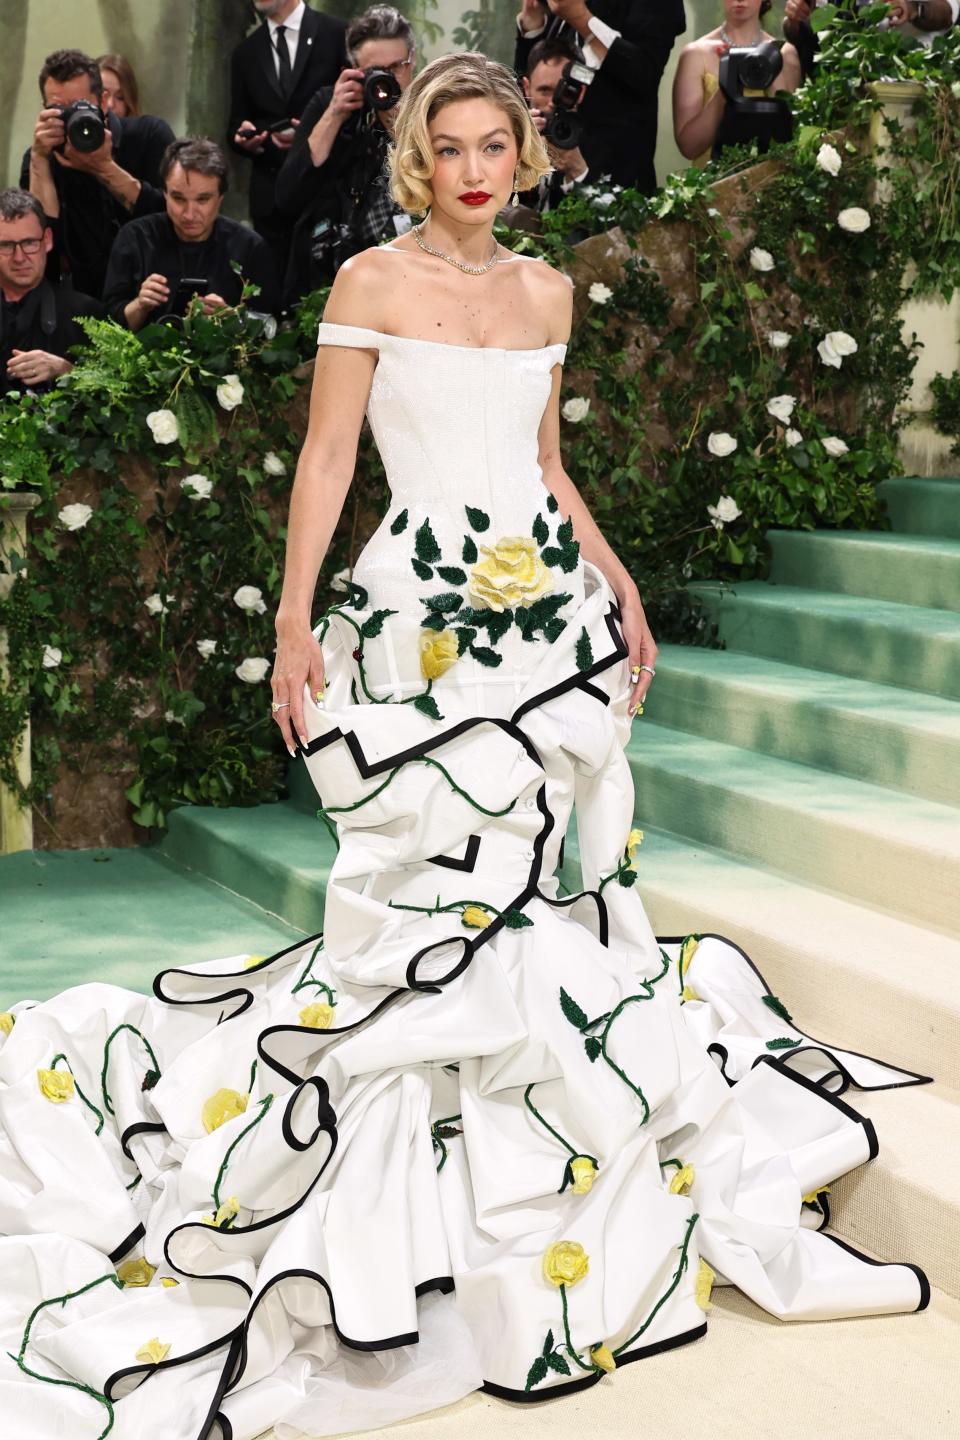 Gigi Hadid in a voluminous white tiered gown with black and green accents, standing on stairs at an event